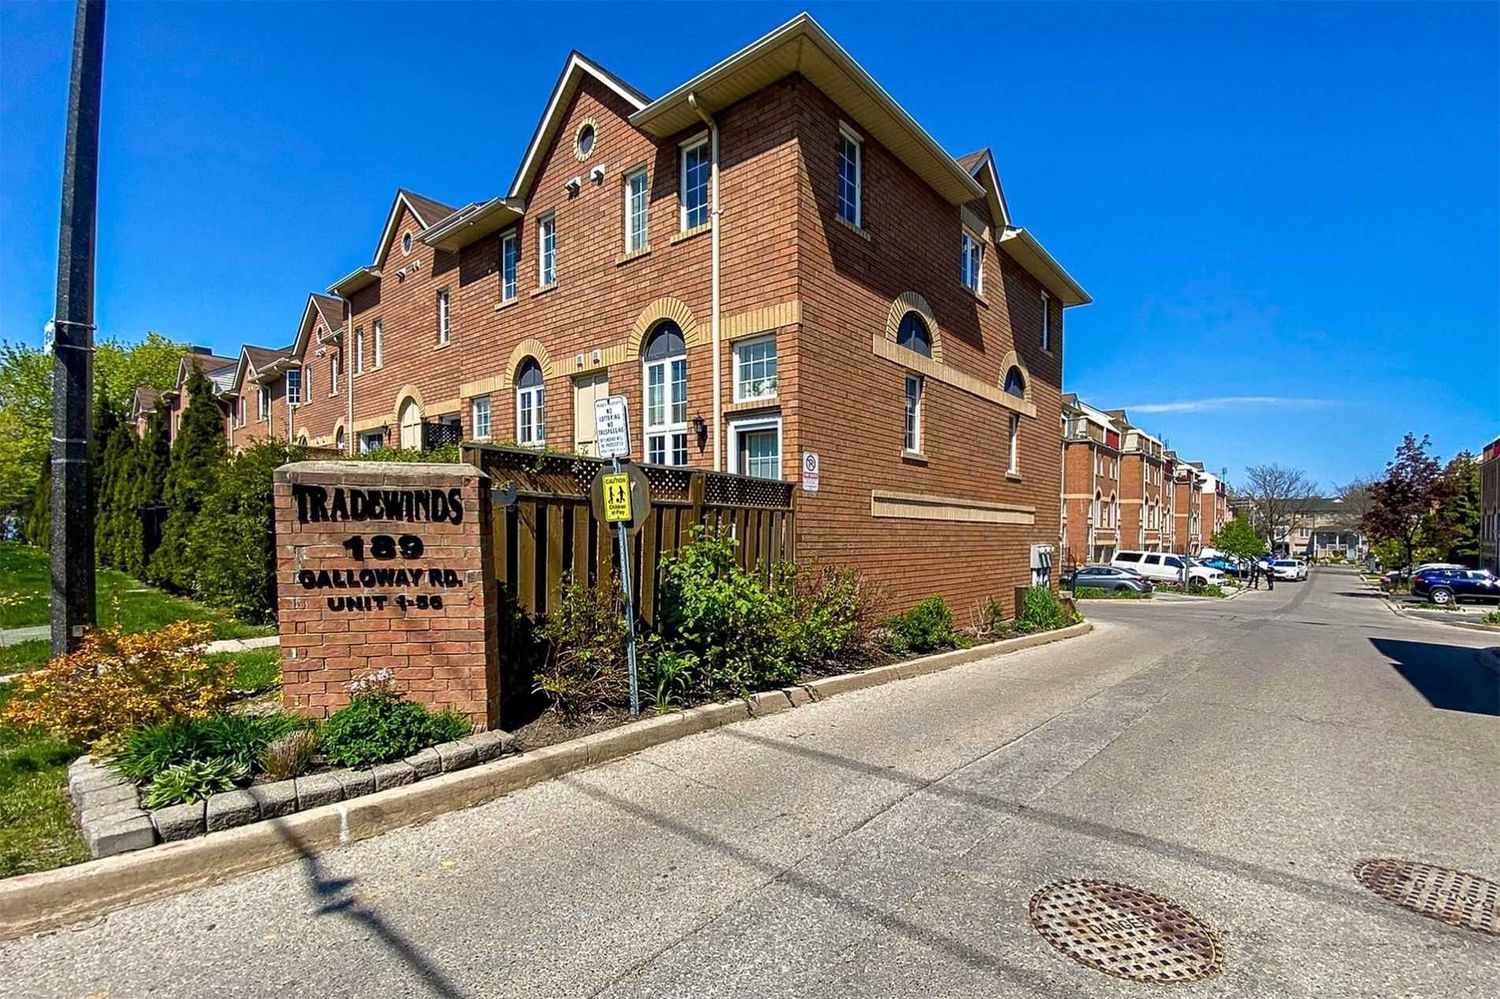 189 Galloway Road. Tradewinds Condos is located in  Scarborough, Toronto - image #1 of 2